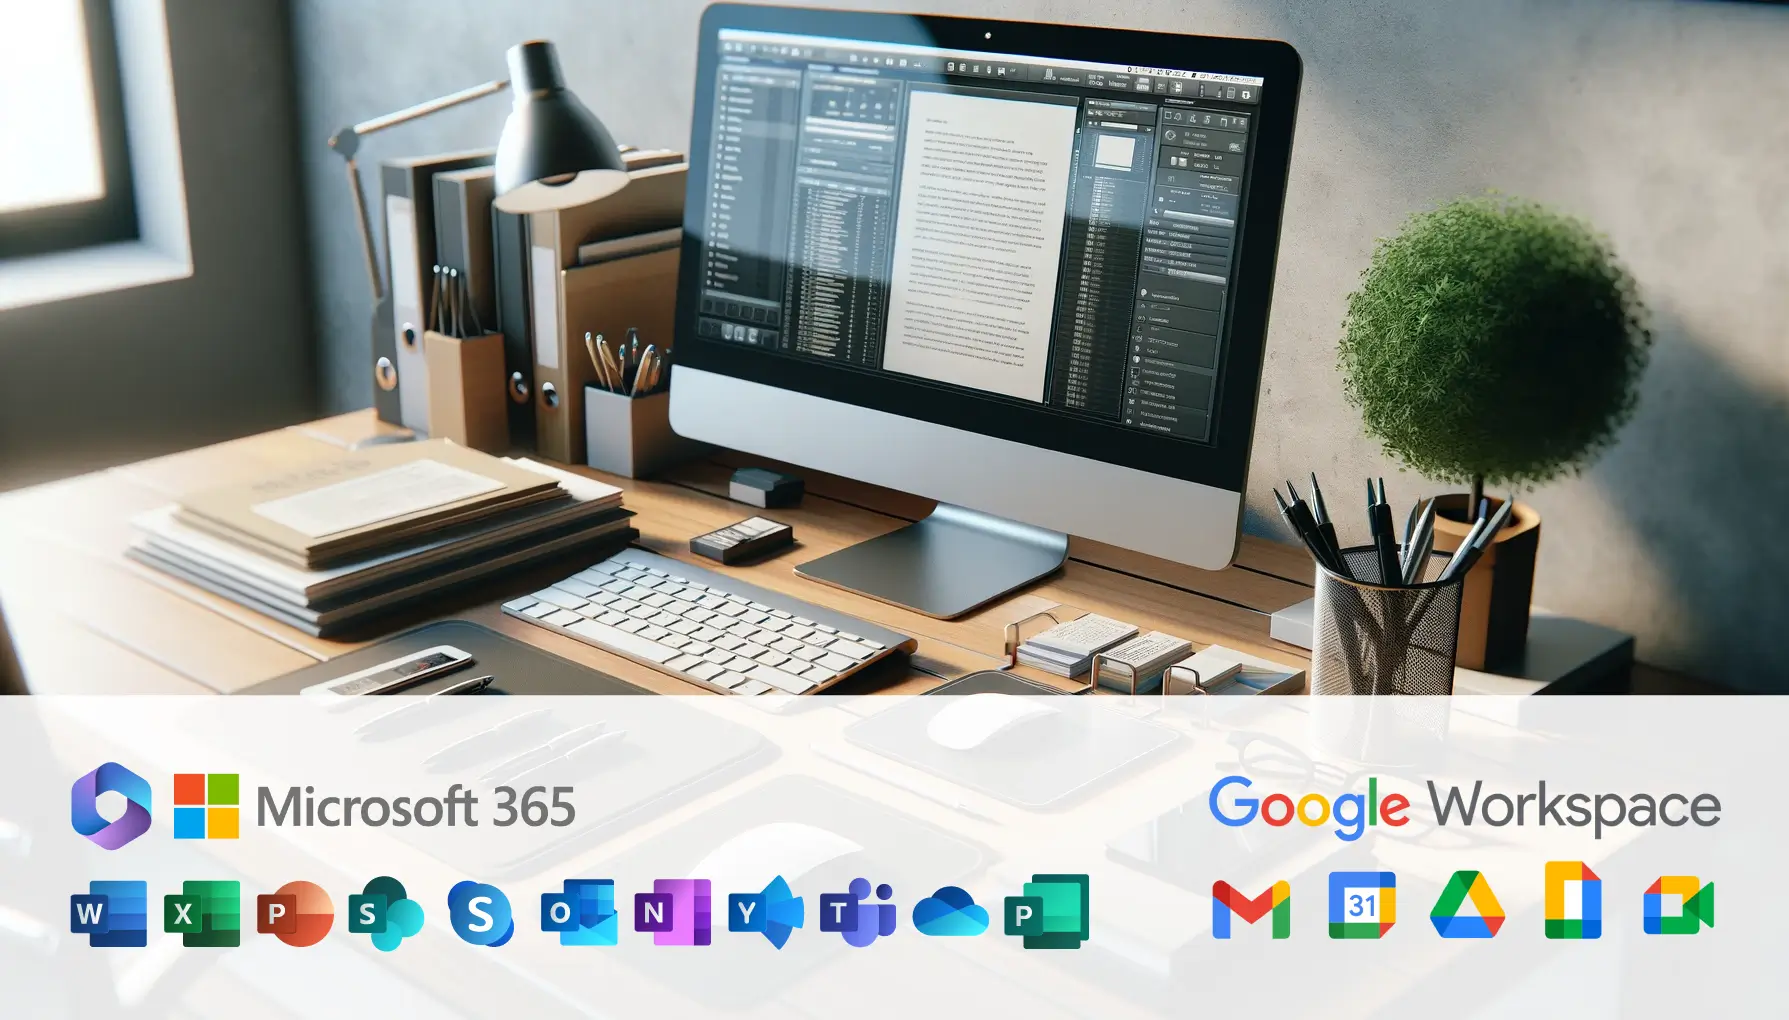 Why you might choose Microsoft 365 over Google Workspace